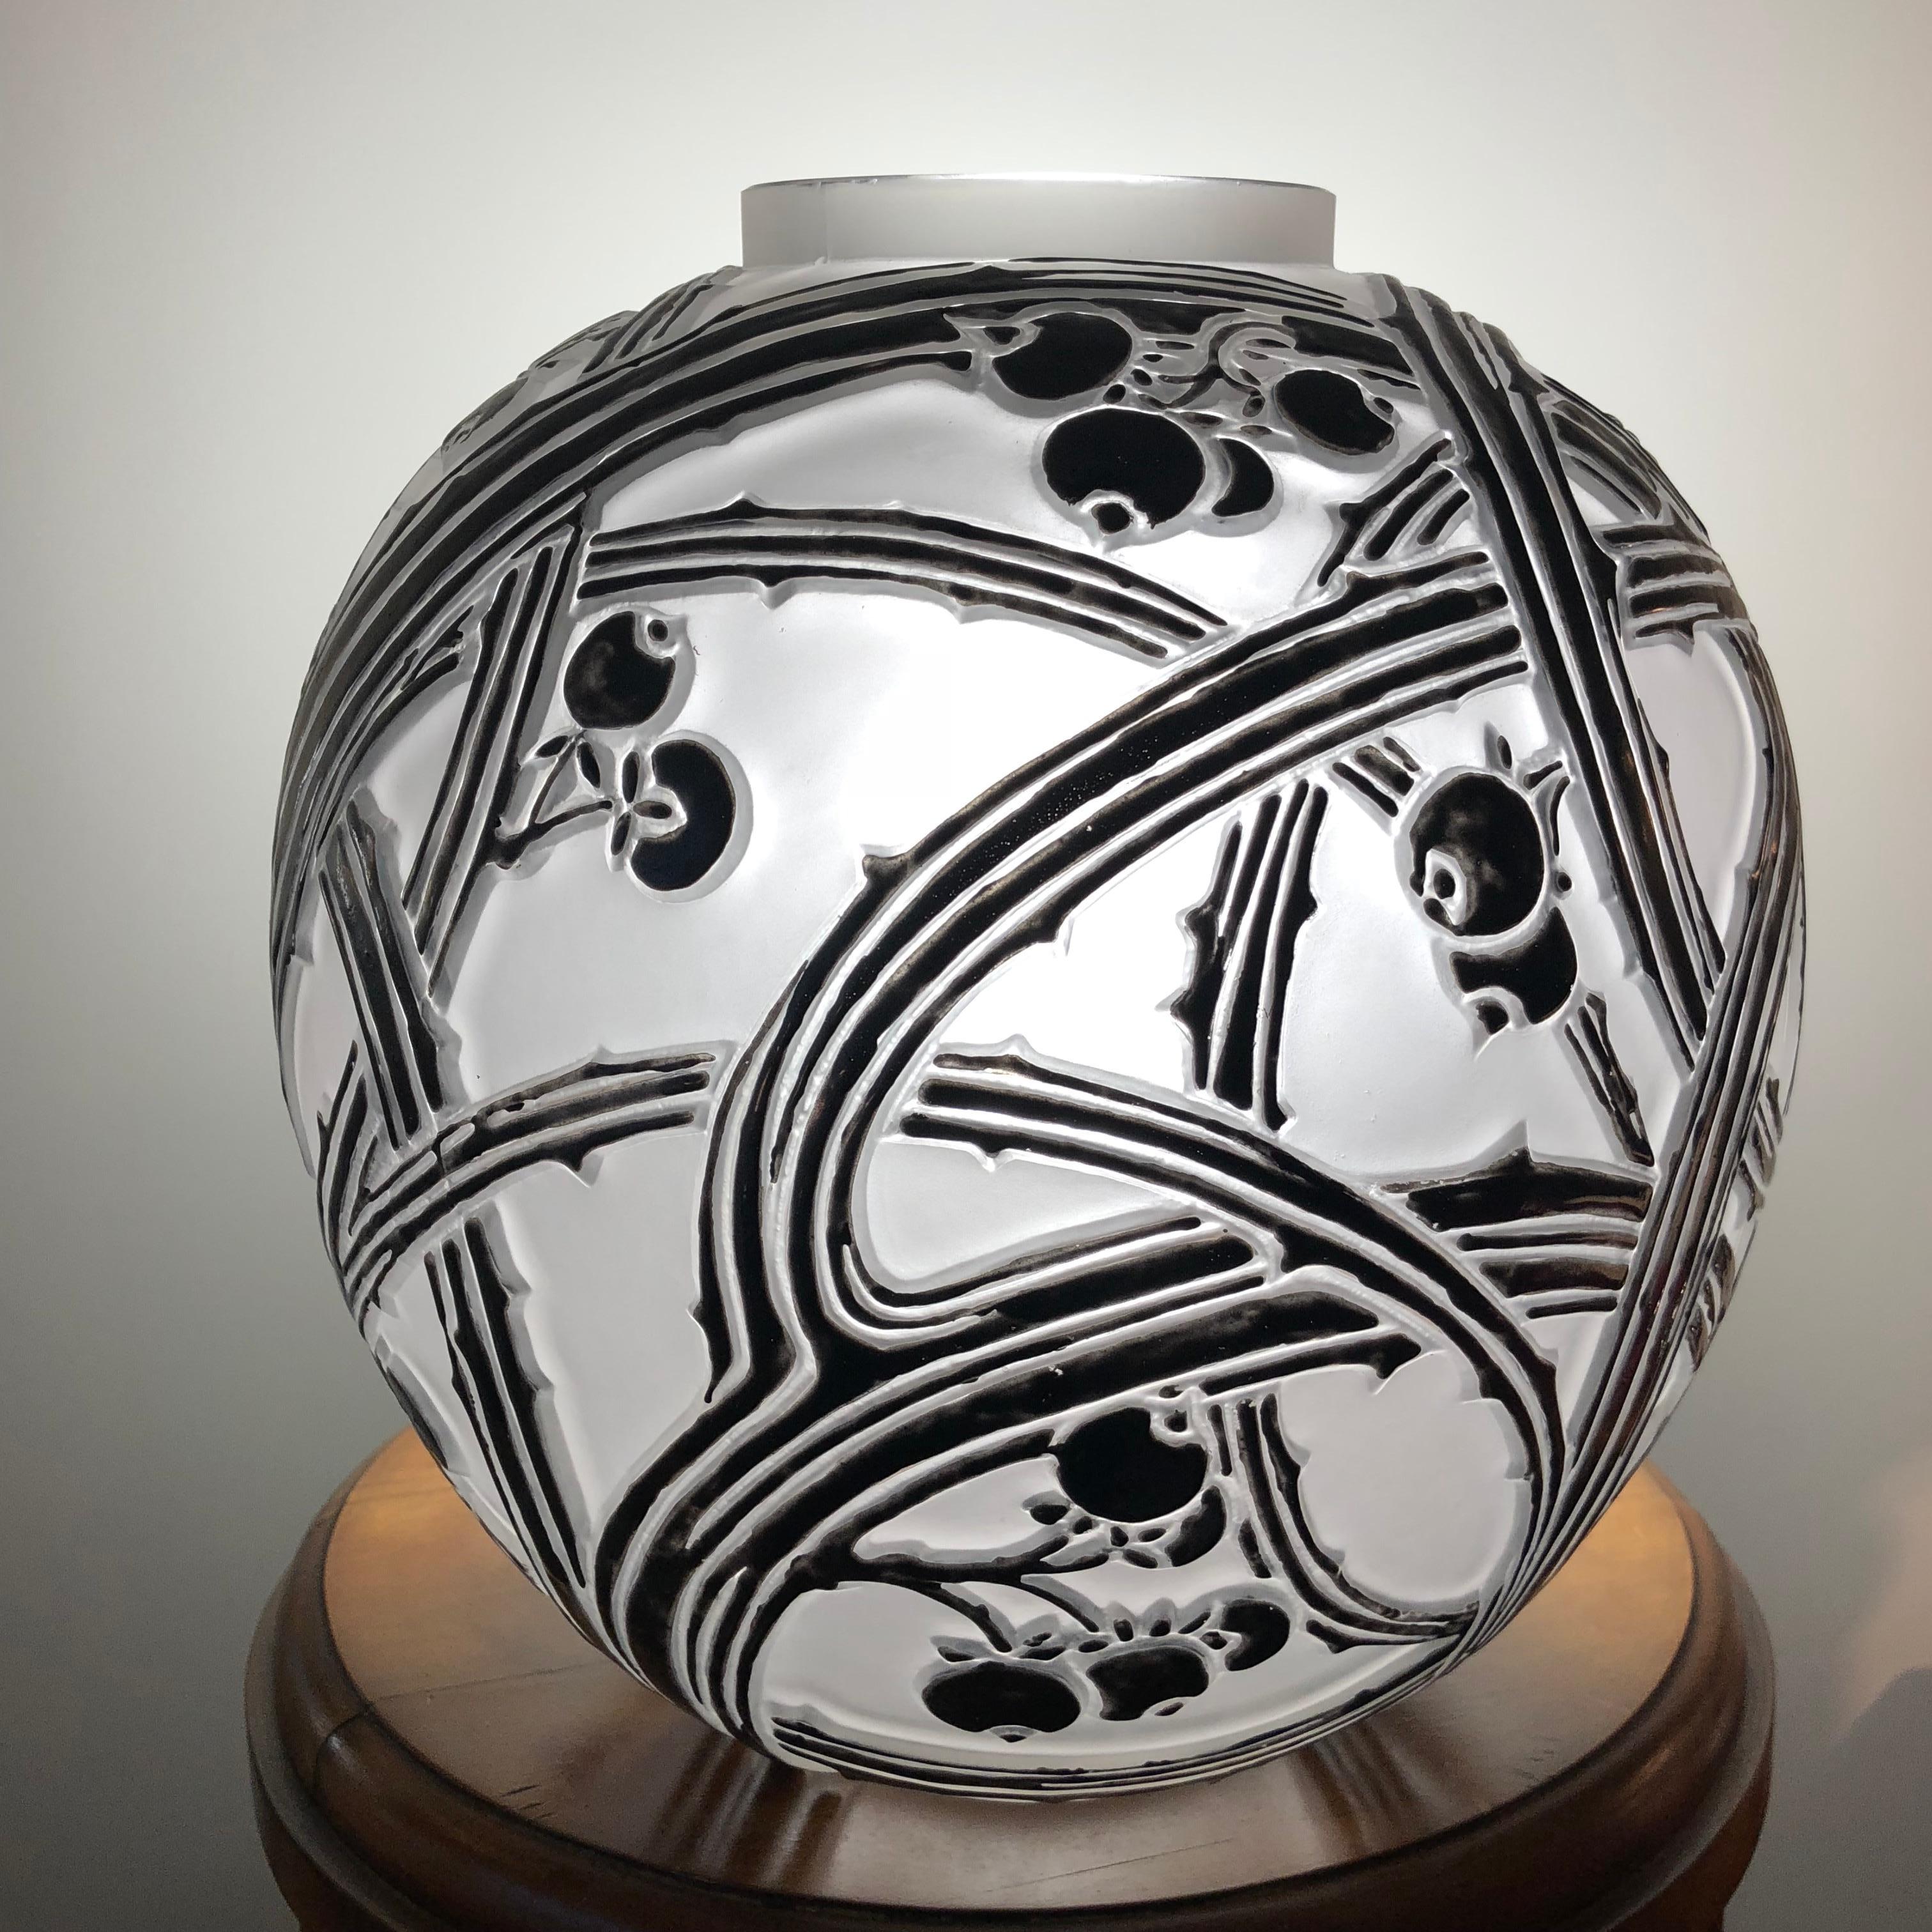 French 1924 Rene Lalique Baies Vase in Frosted Glass with Shinny Original Black Enamel